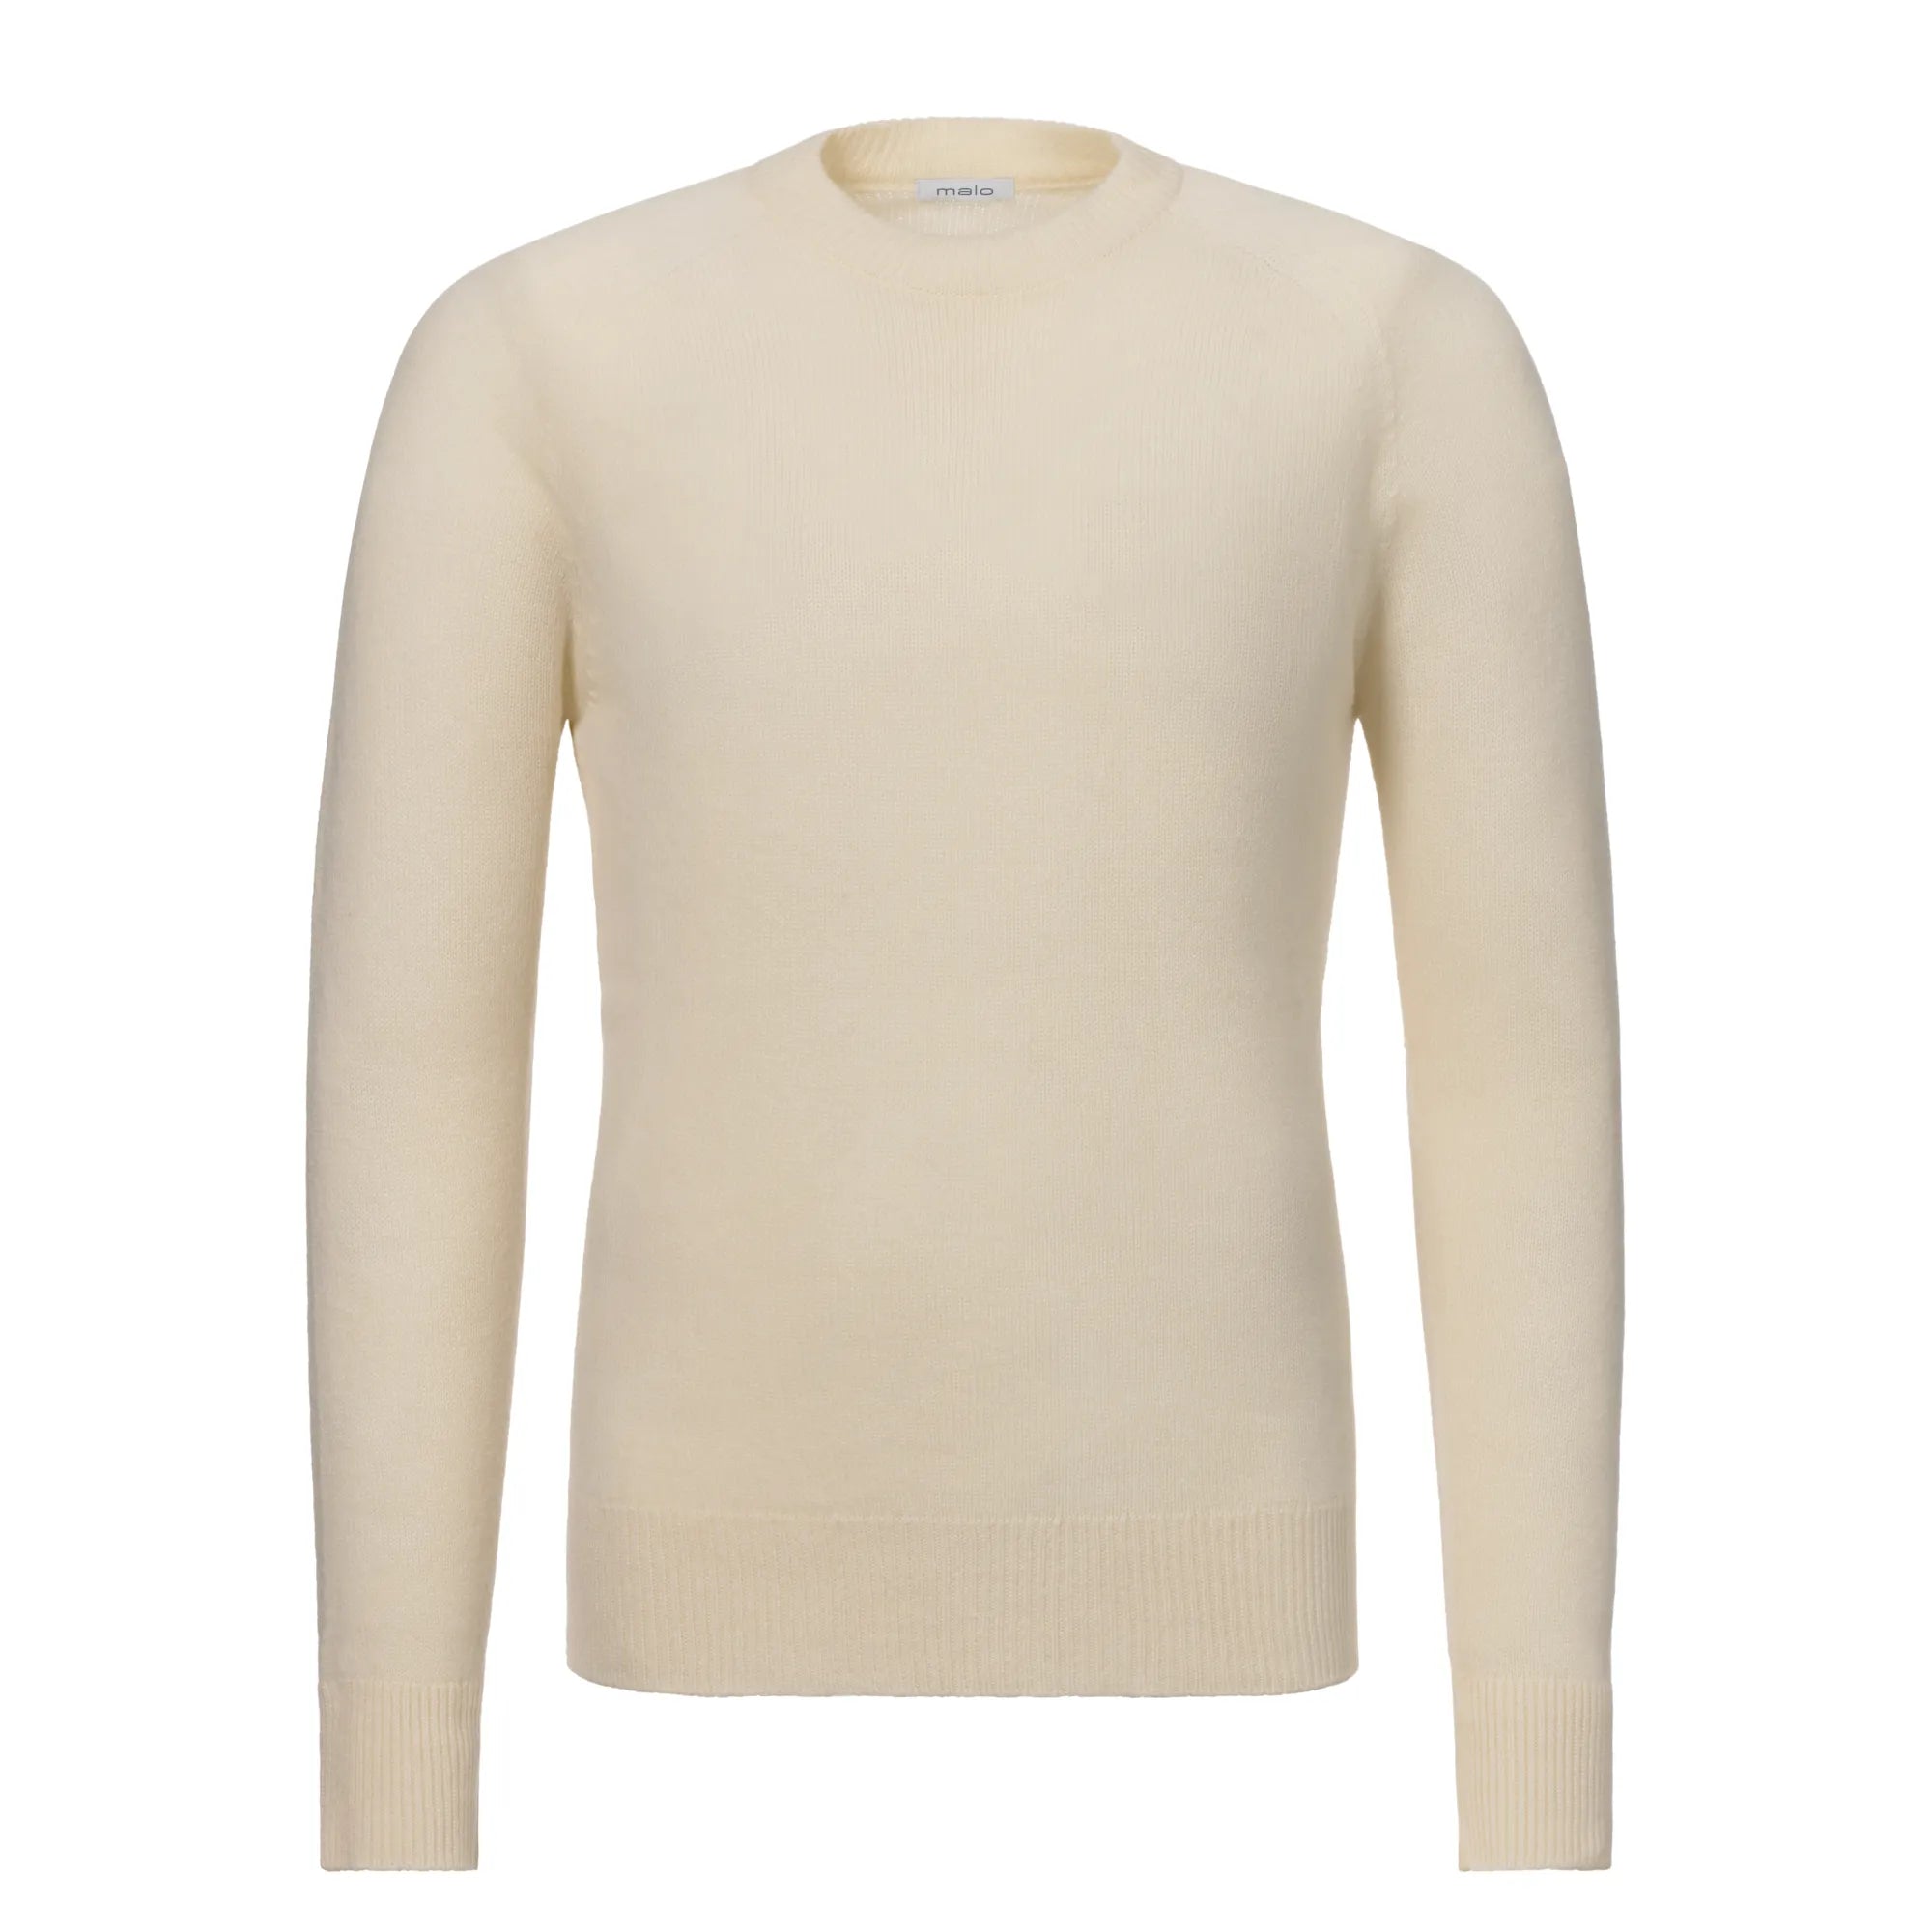 Knitted Cashmere Cream White Sweater